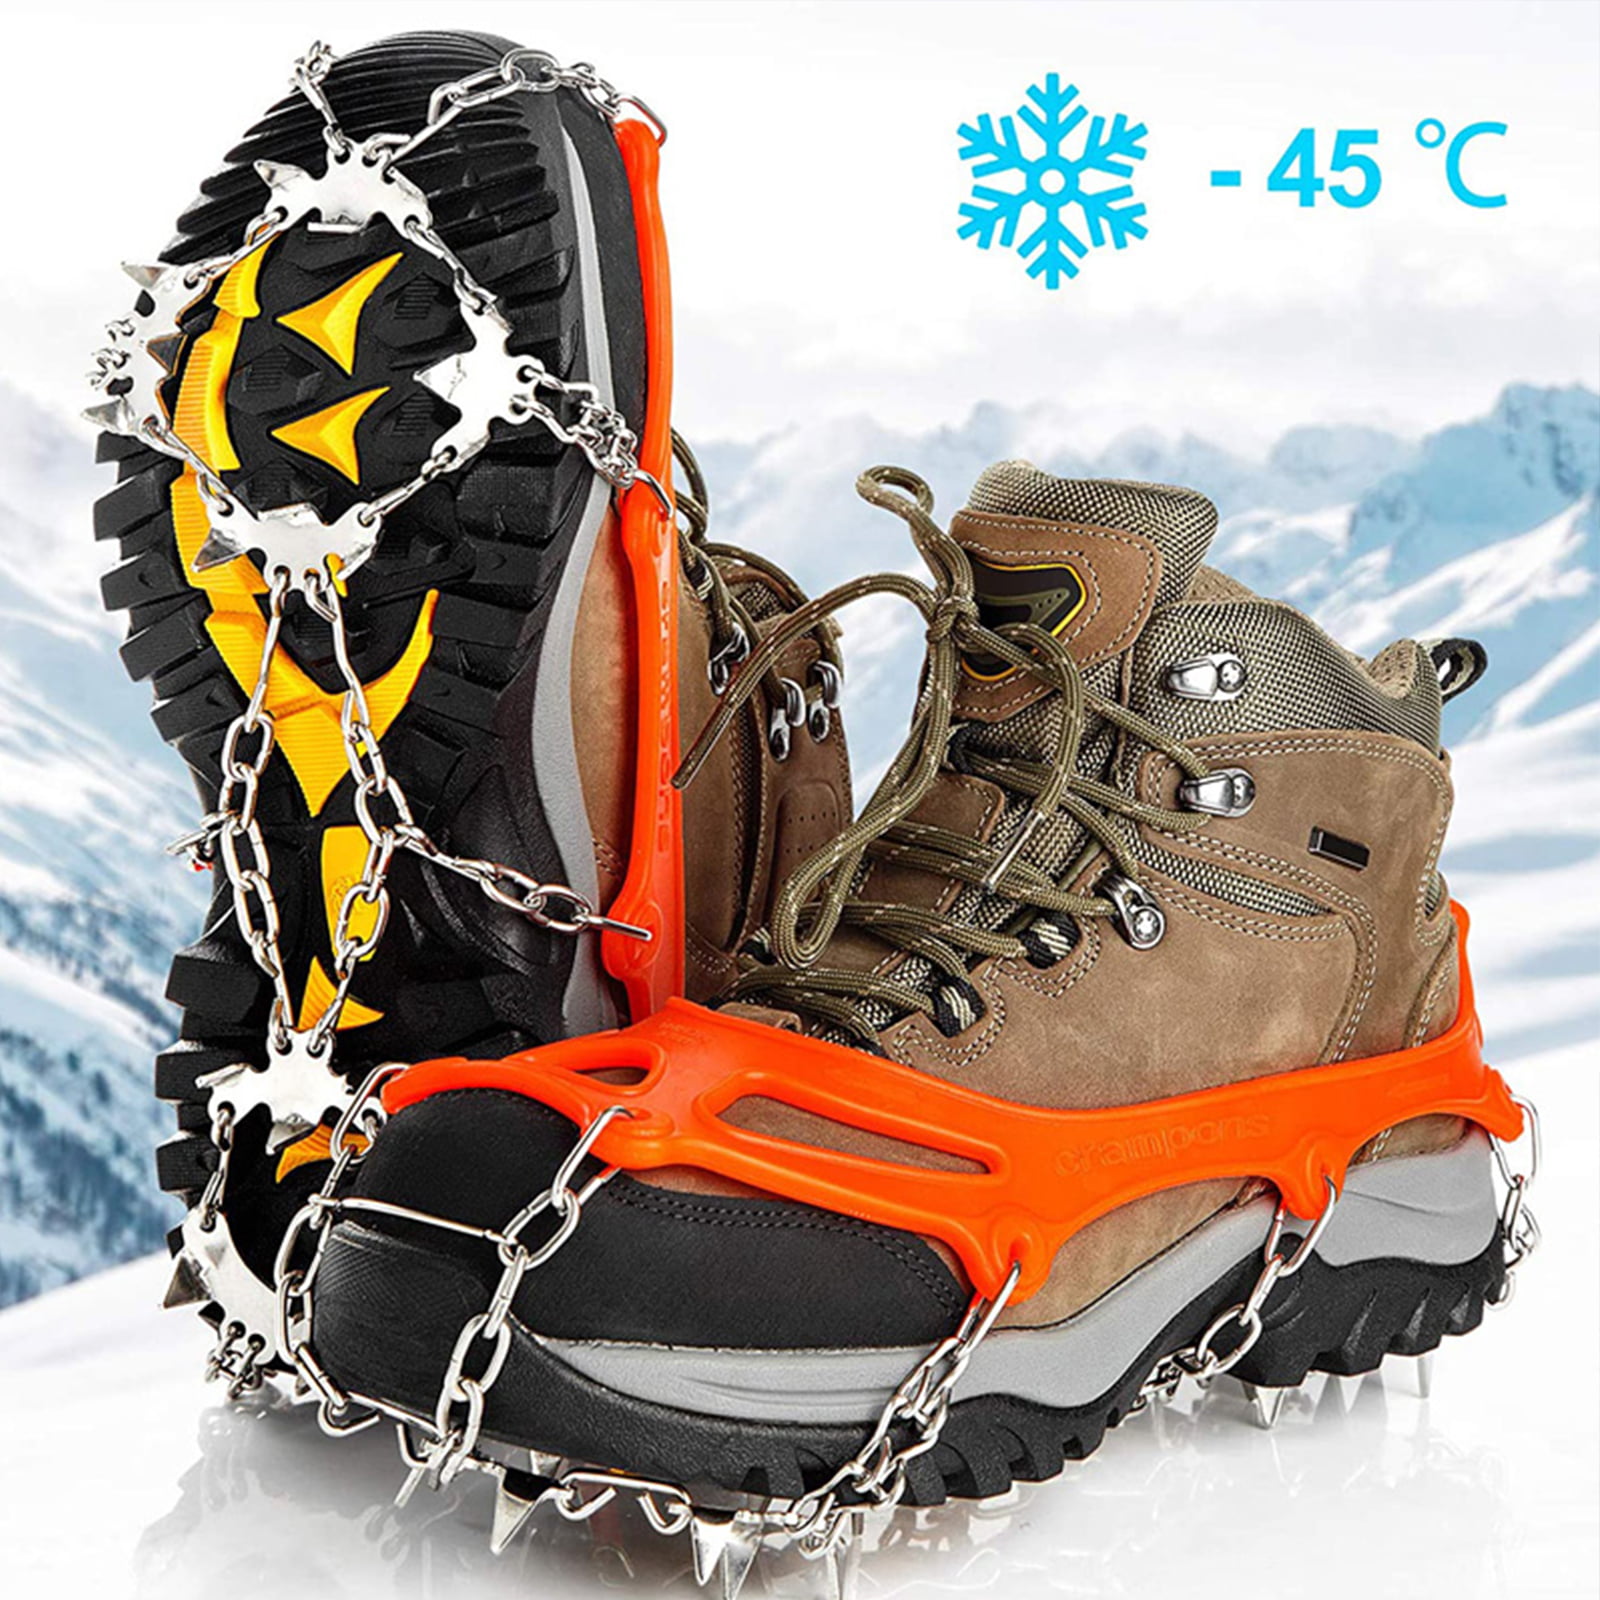 Crampons Ice Cleats Traction Snow Grips for Boots Shoes Women Men Kids Anti Slip 19 Stainless Steel Spikes Safe Protect for Hiking Fishing Walking Climbing Mountaineering 